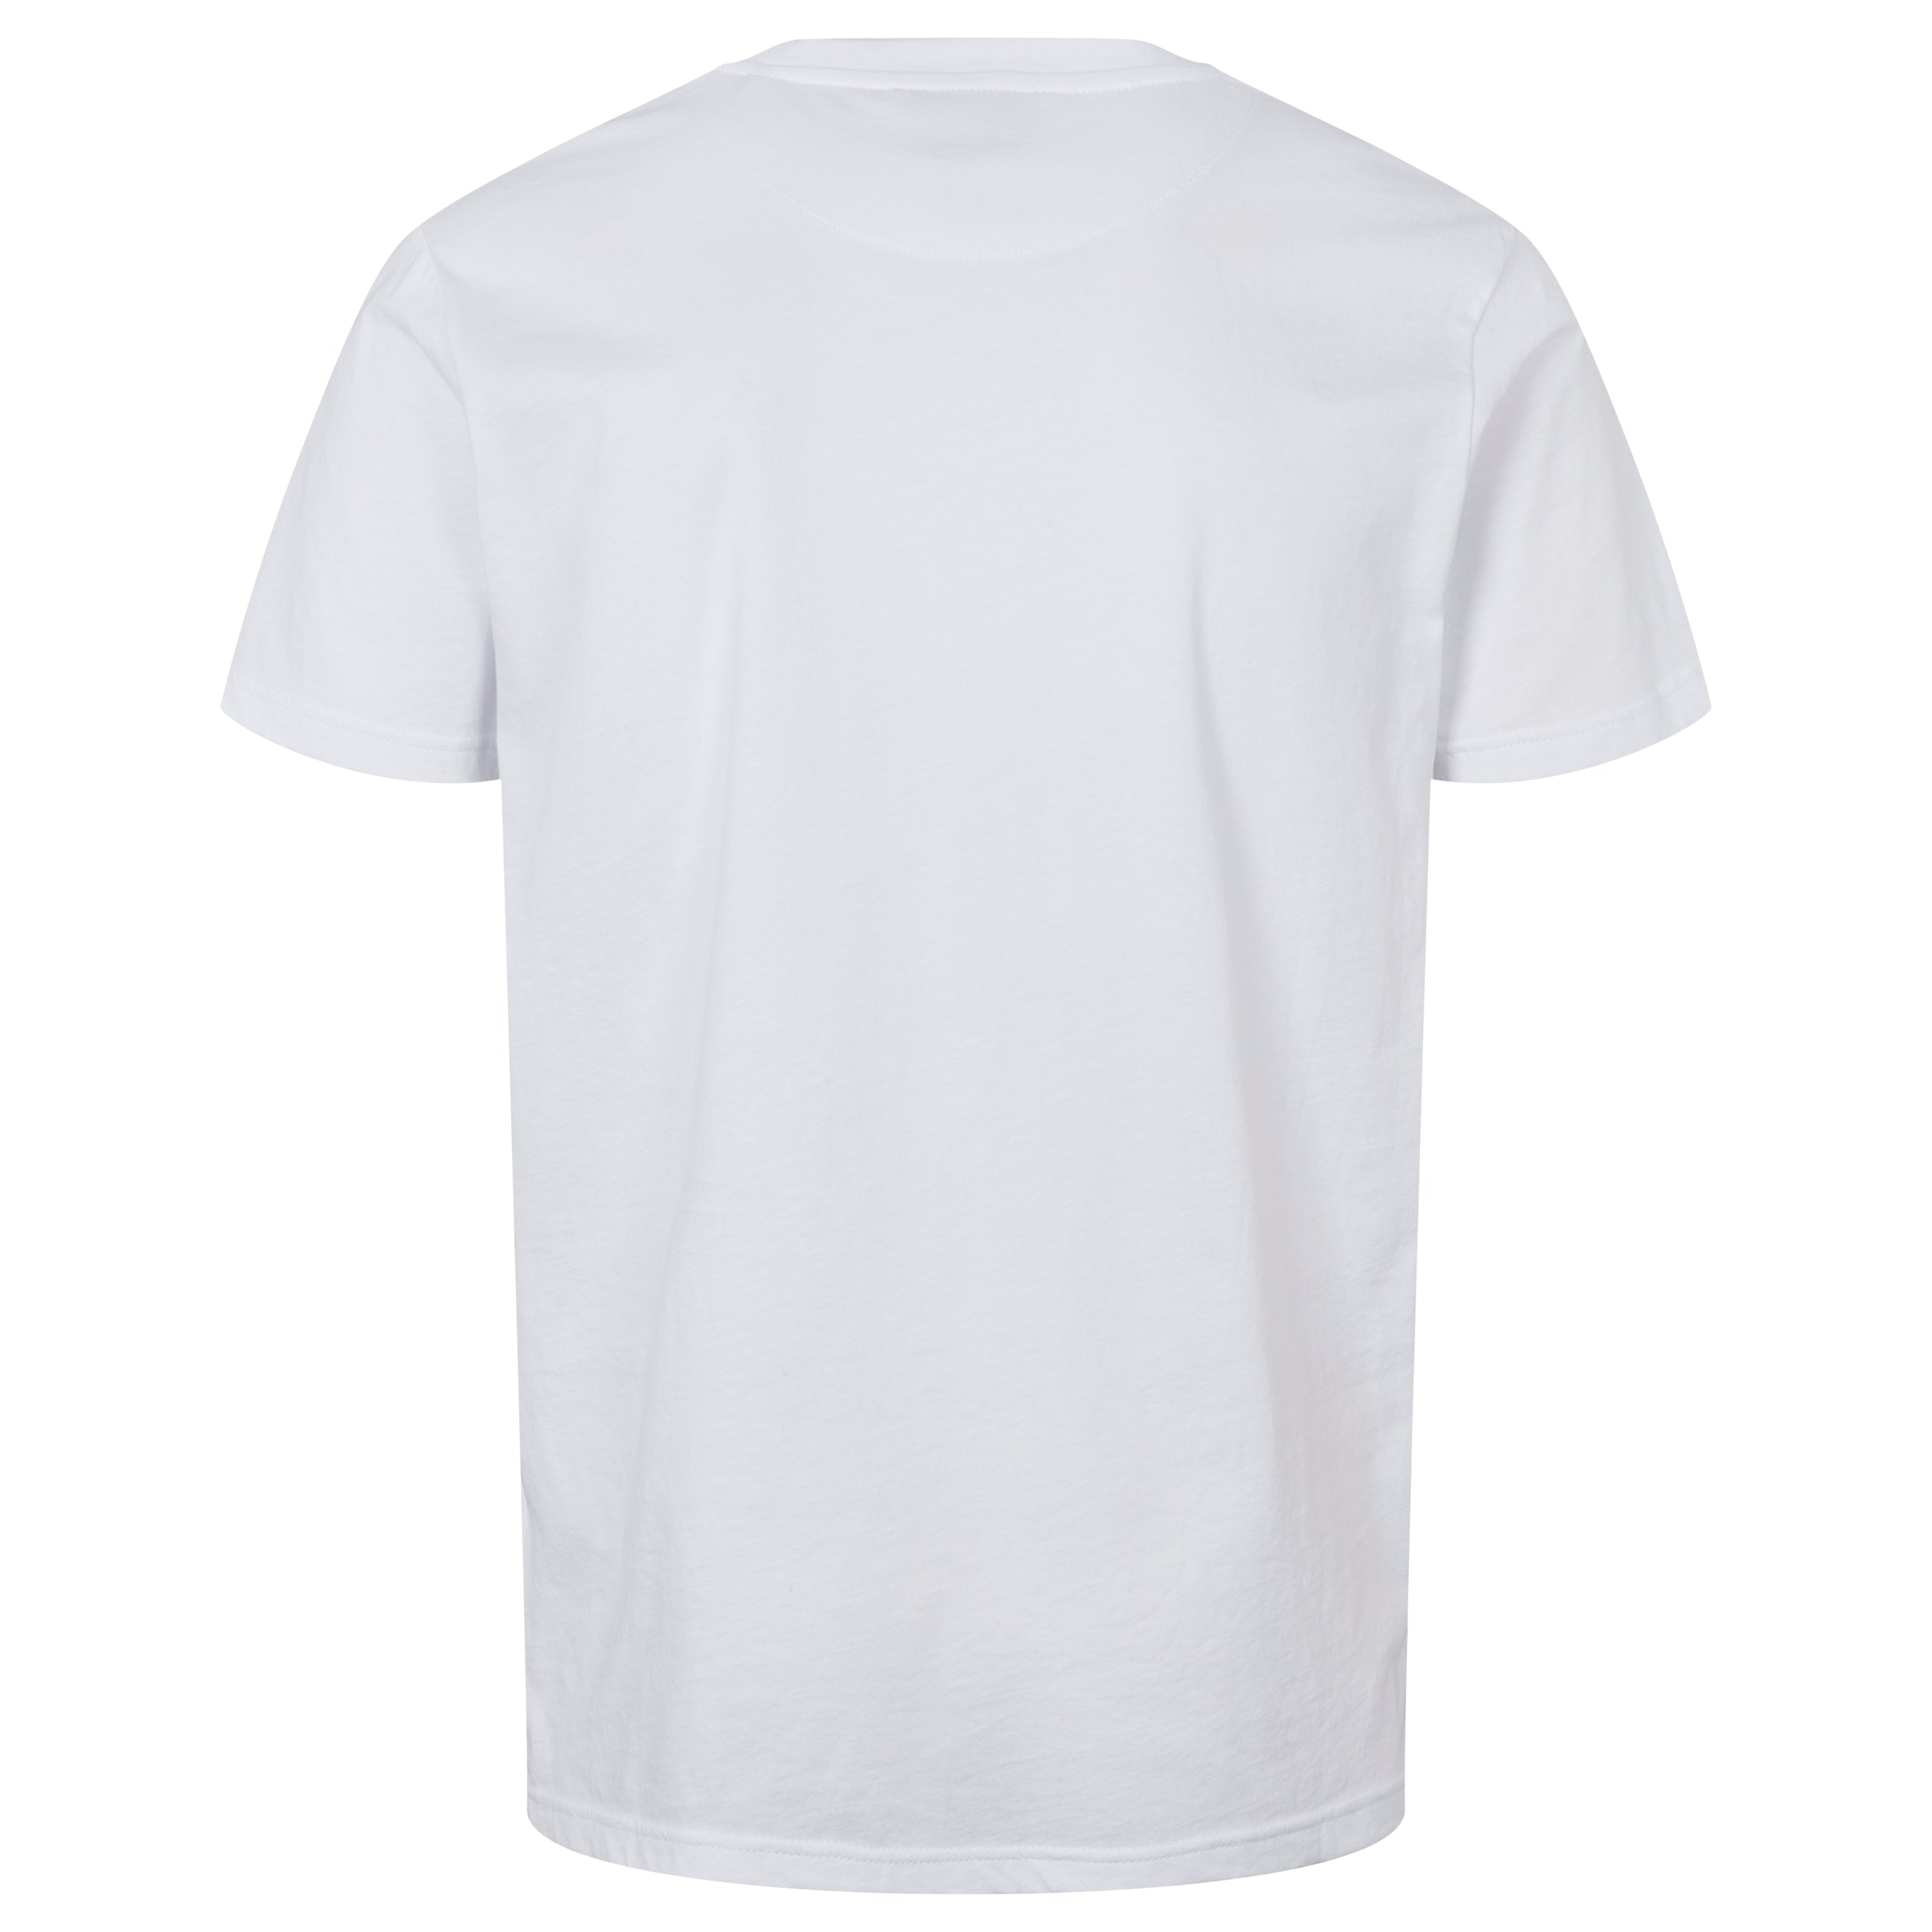 By Garment Makers The Organic Tee GOTS T-shirt SS 1001 White